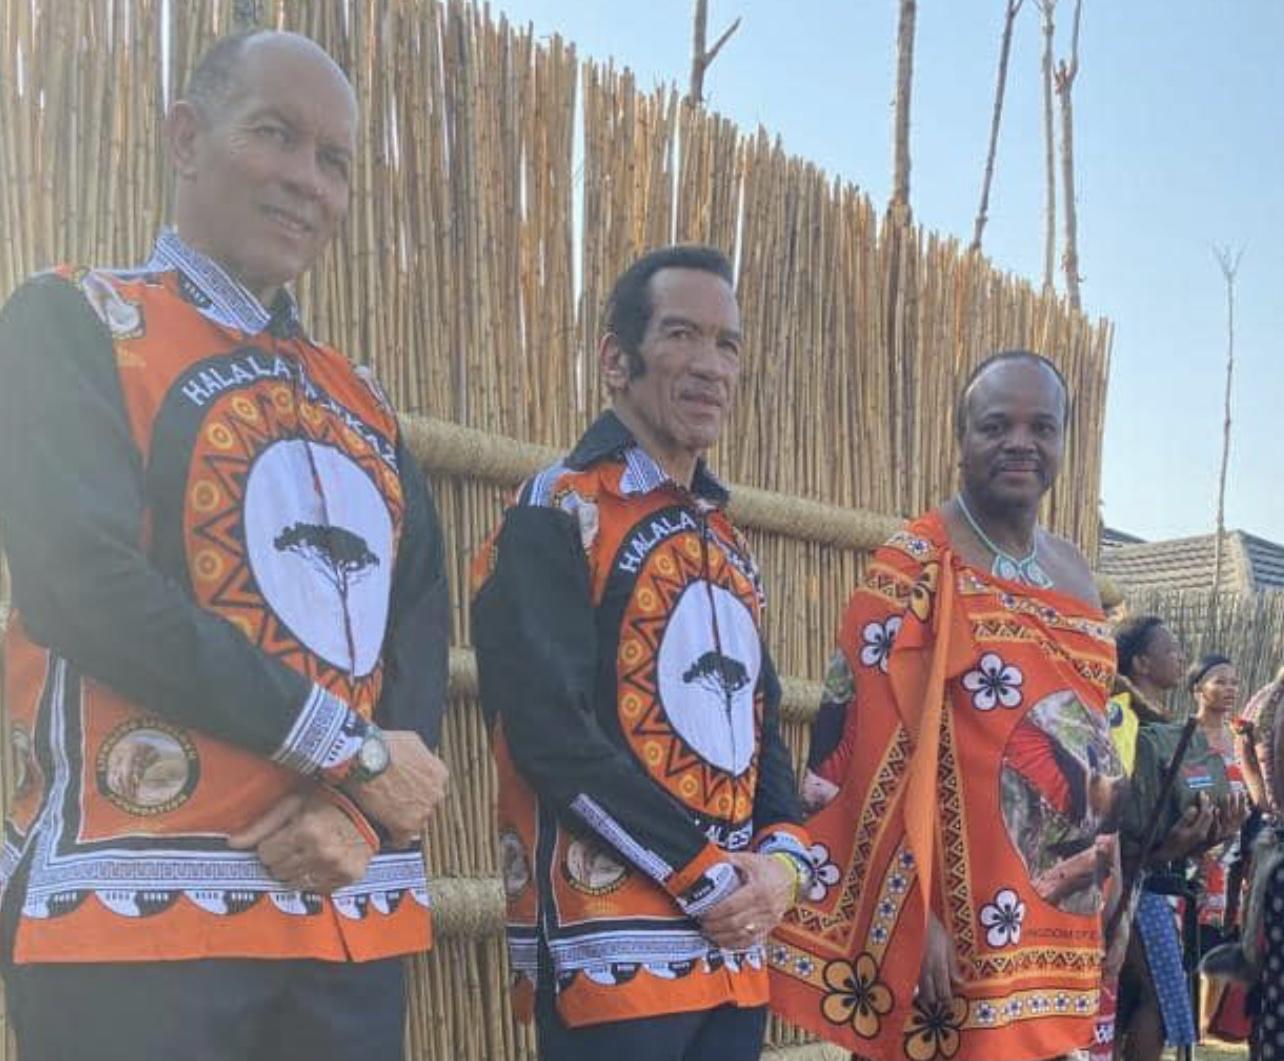 Wanted former Botswana President Ian Khama attends Umhlanga Reed Dance as King Mswati’s guest, gets State security